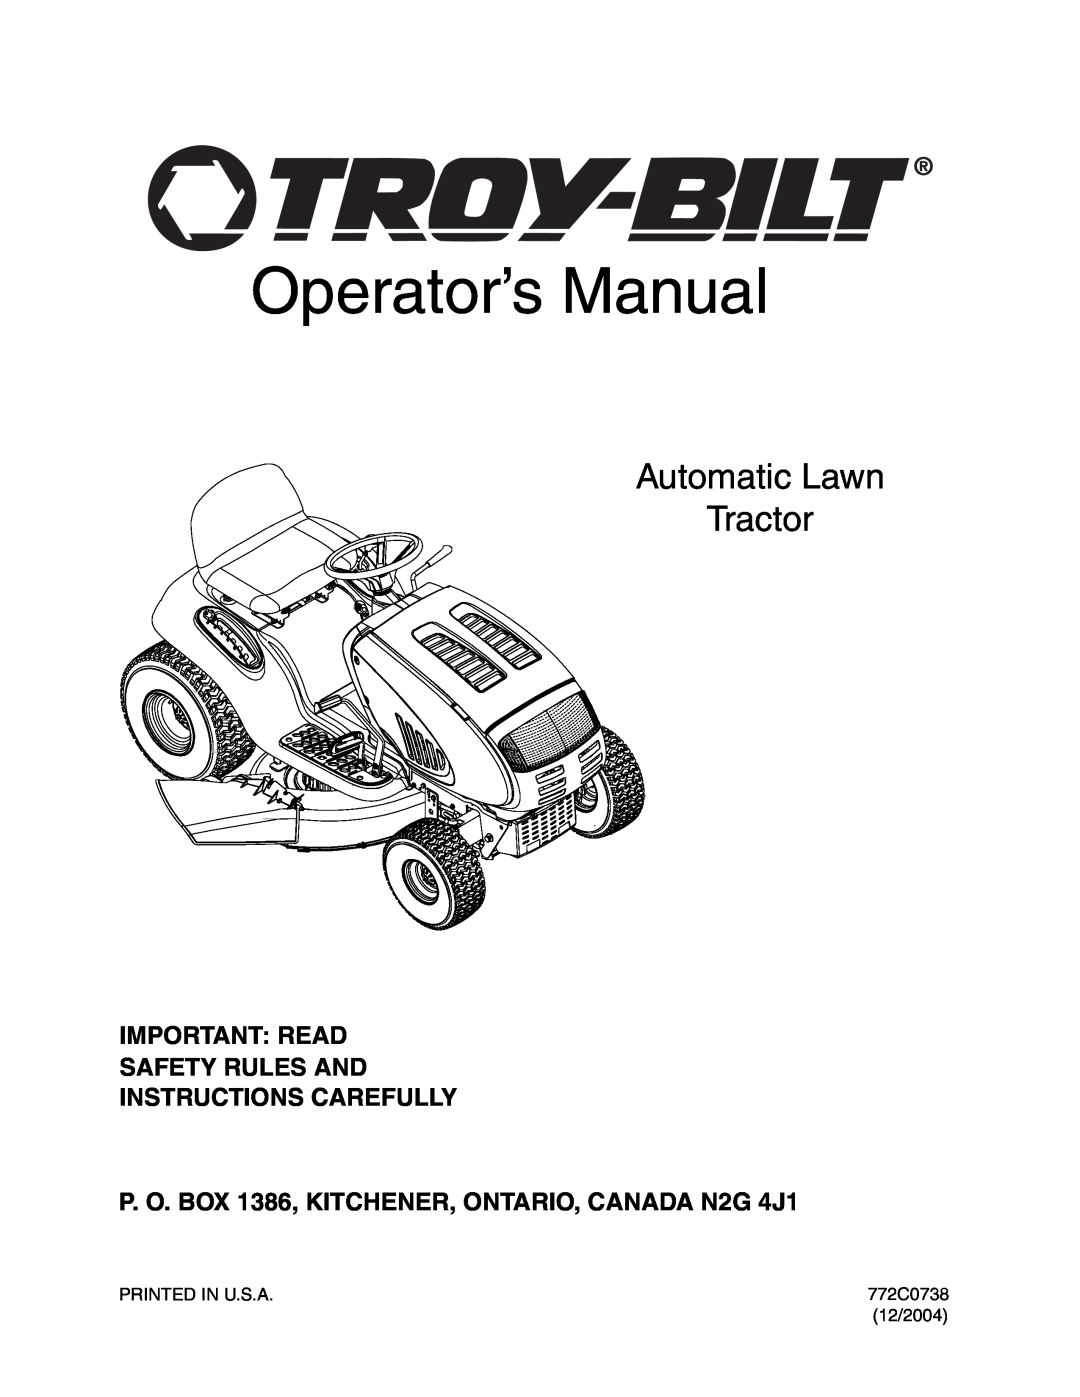 Troy-Bilt Automatic Lawn Tractor manual Operator’s Manual, Important Read Safety Rules And Instructions Carefully 